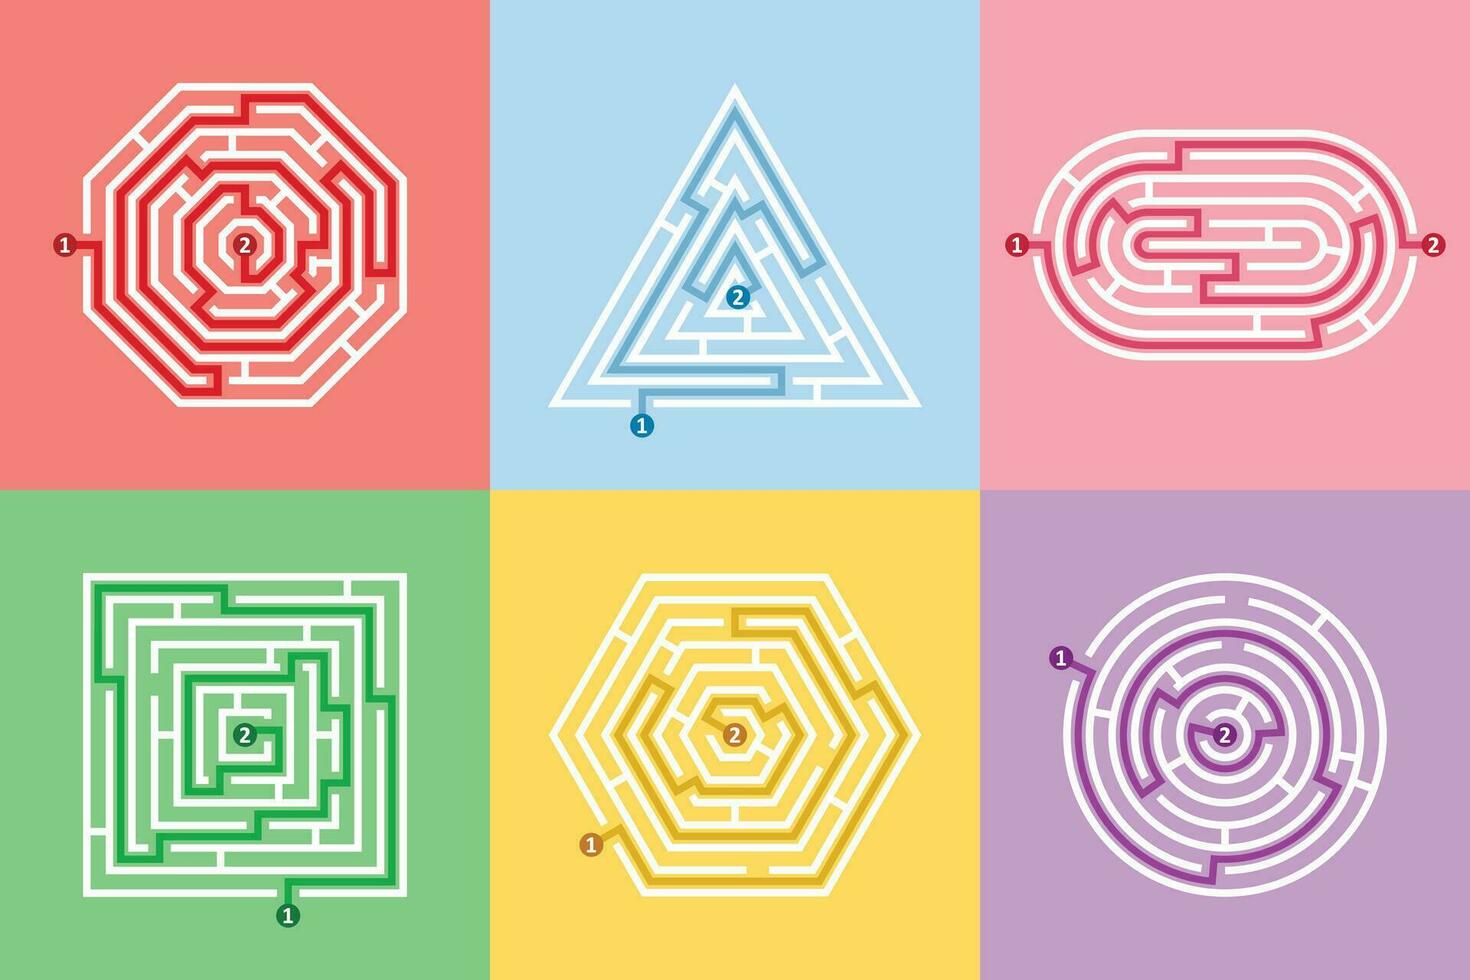 Labyrinth different shapes game and maze fun puzzle set. Maze square, round, hexagon, oval and triangle puzzle rebus riddle logic game concept. Vector illustration